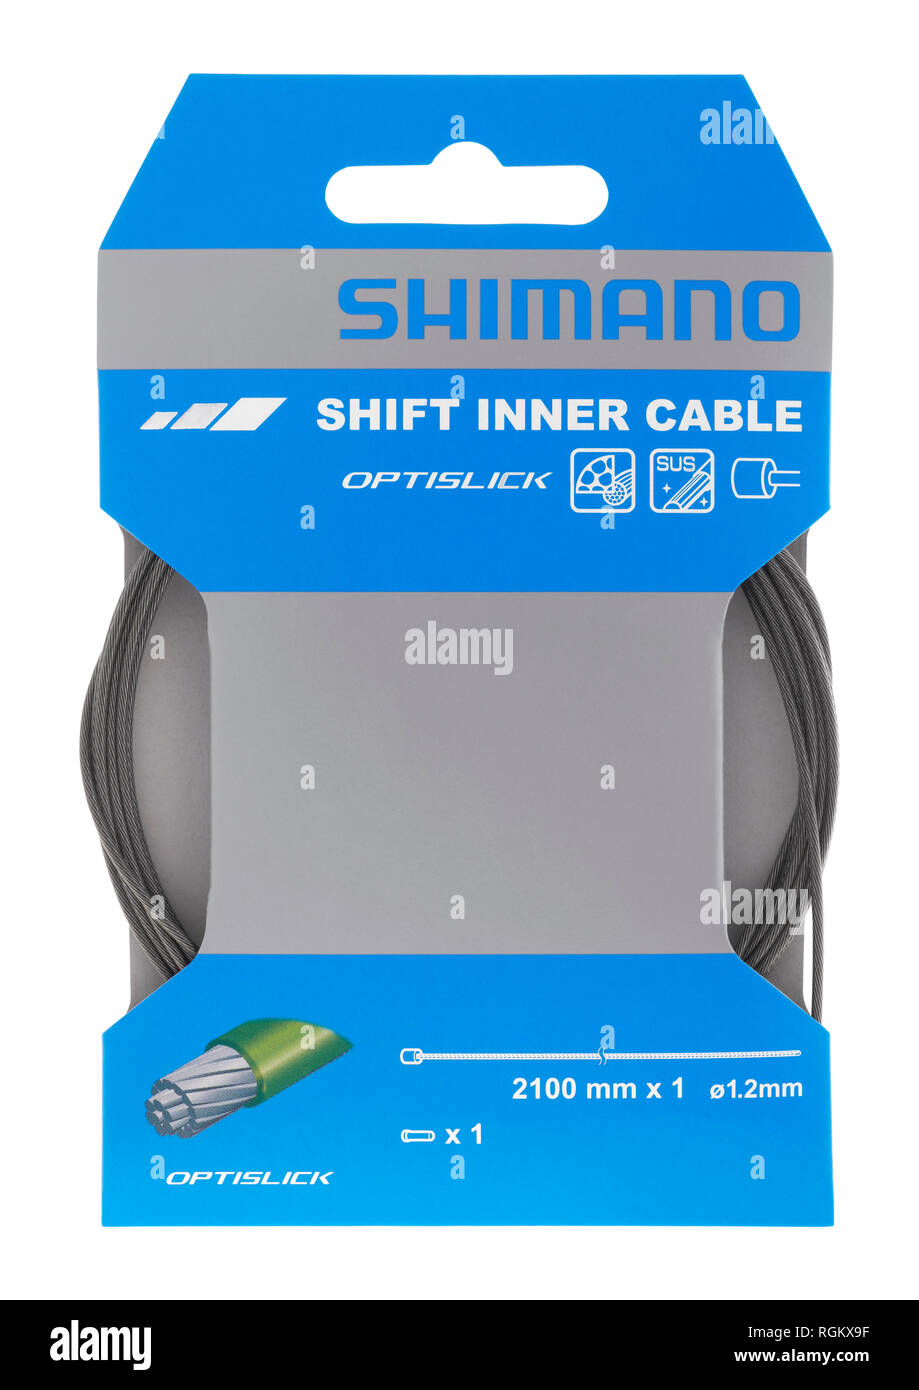 Shimano optislick shift inner gear cable on hwite background Stock Photo